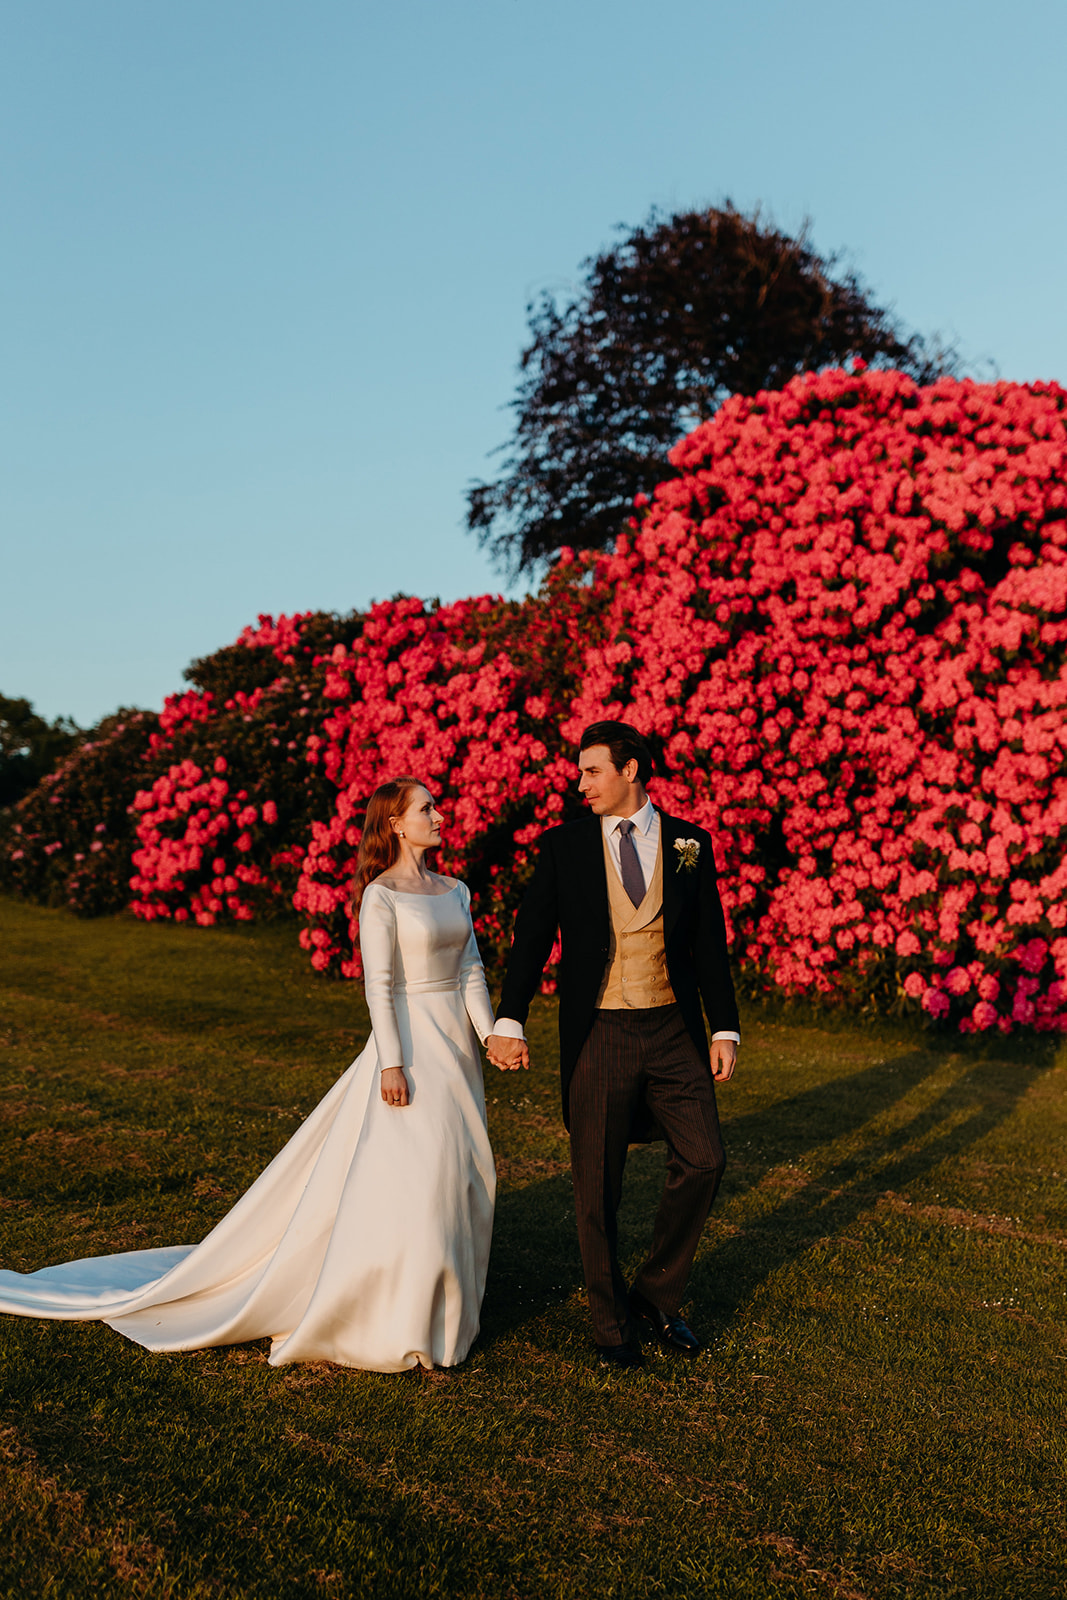 The charm of a May wedding on full display at Buckhurst Park in the UK.